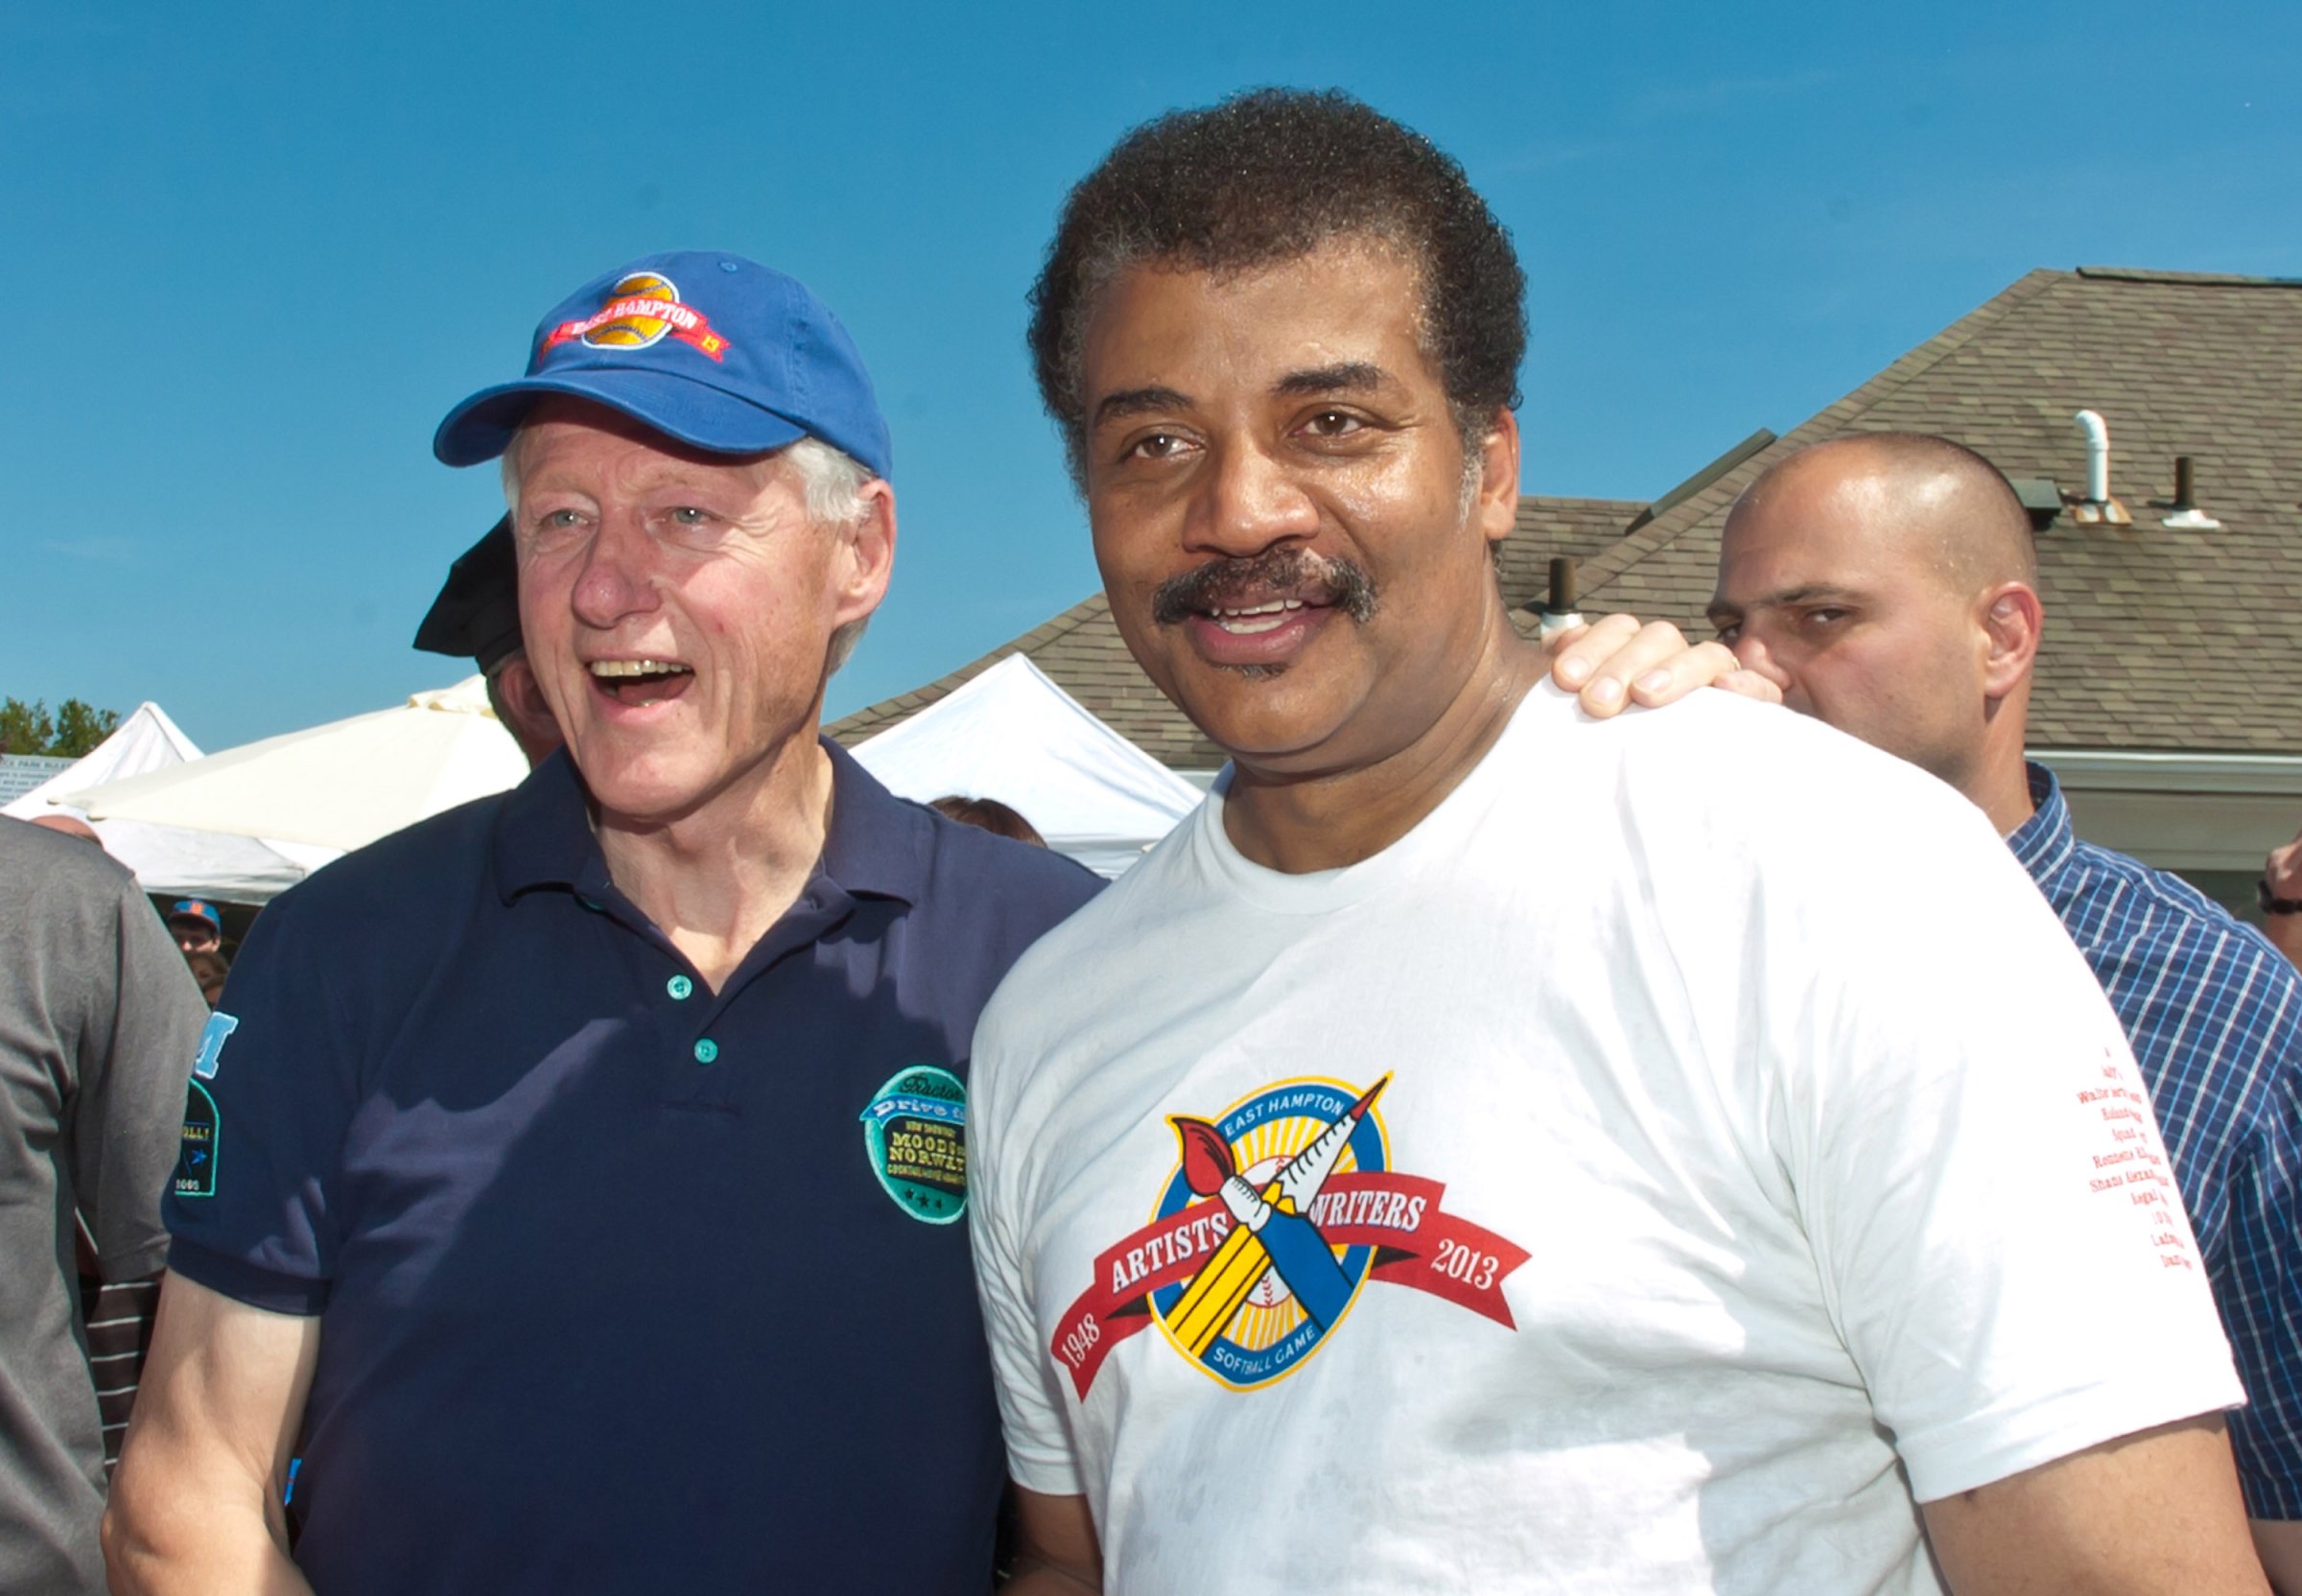 Former President Bill Clinton and Dr. Neil deGrasse Tyson attend the 65th Anniversary Artists & Writers Celebrity Softball Game at Herrick Park on Aug. 17, 2013 in East Hampton, New York.